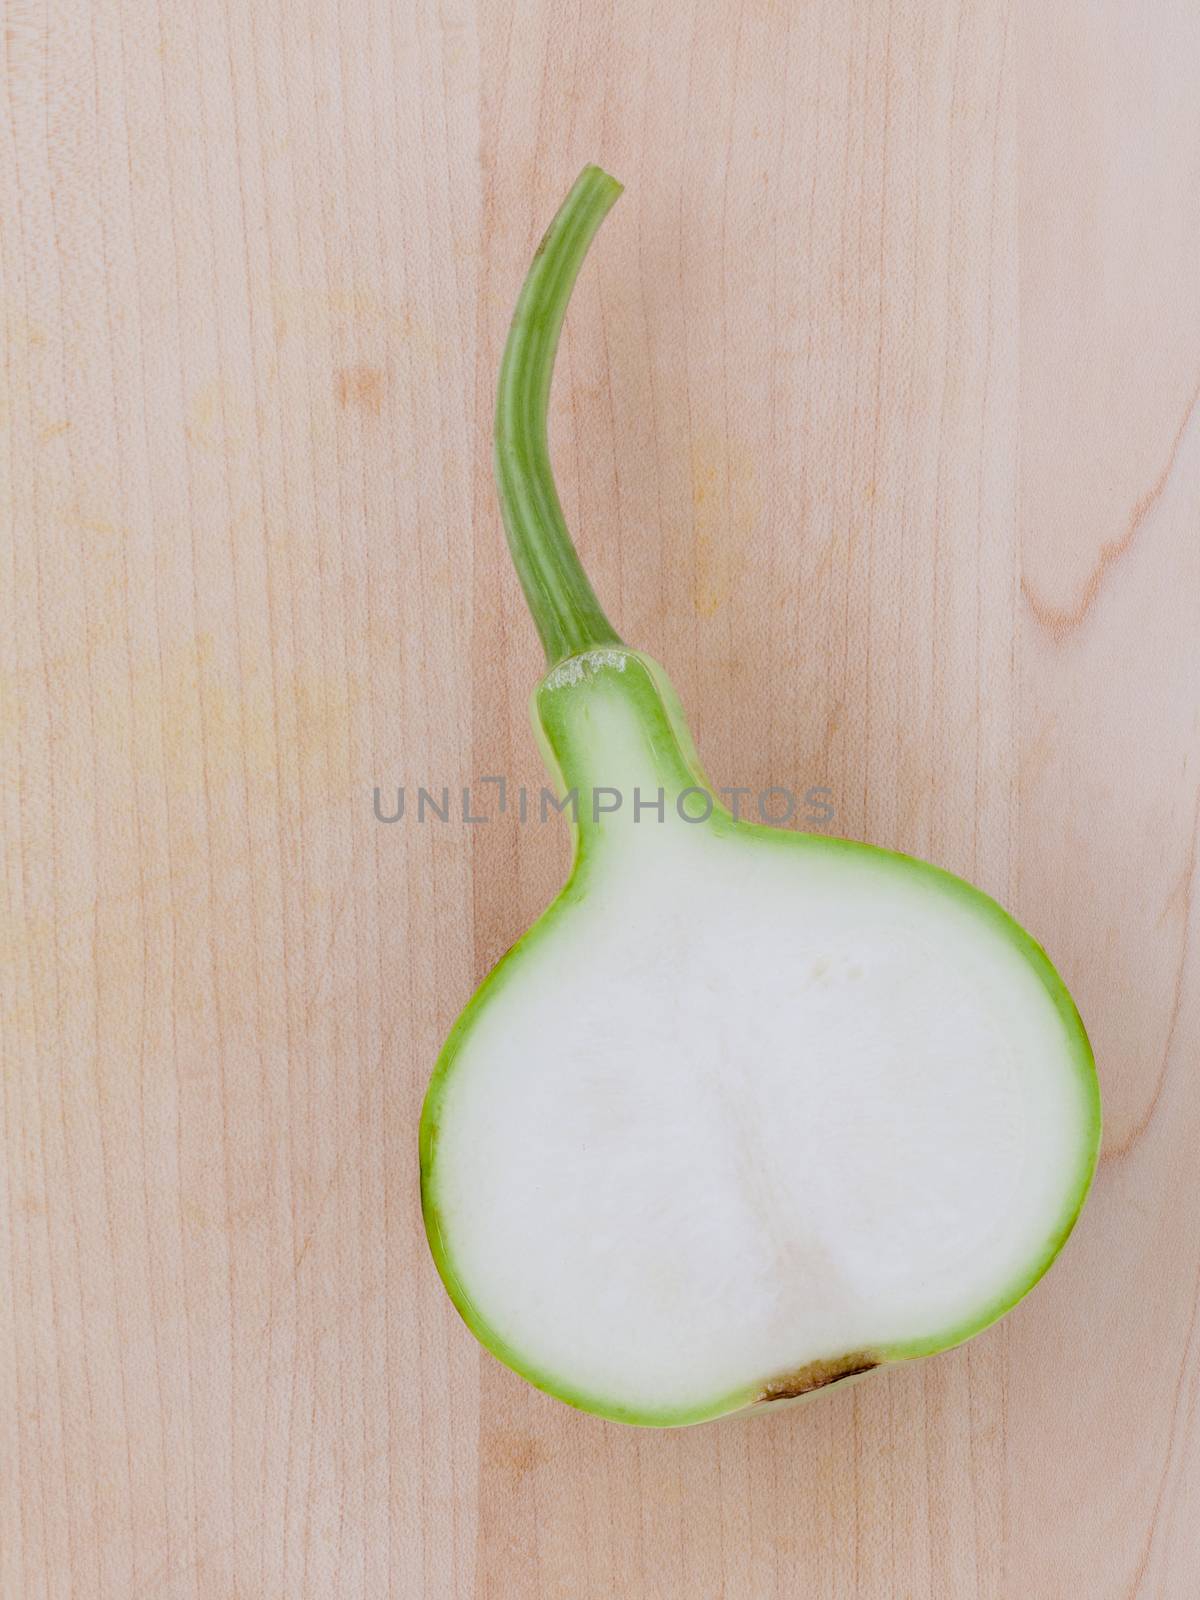 Halved bottle gourd or calabash gourd .The one of the vegetables by kerdkanno